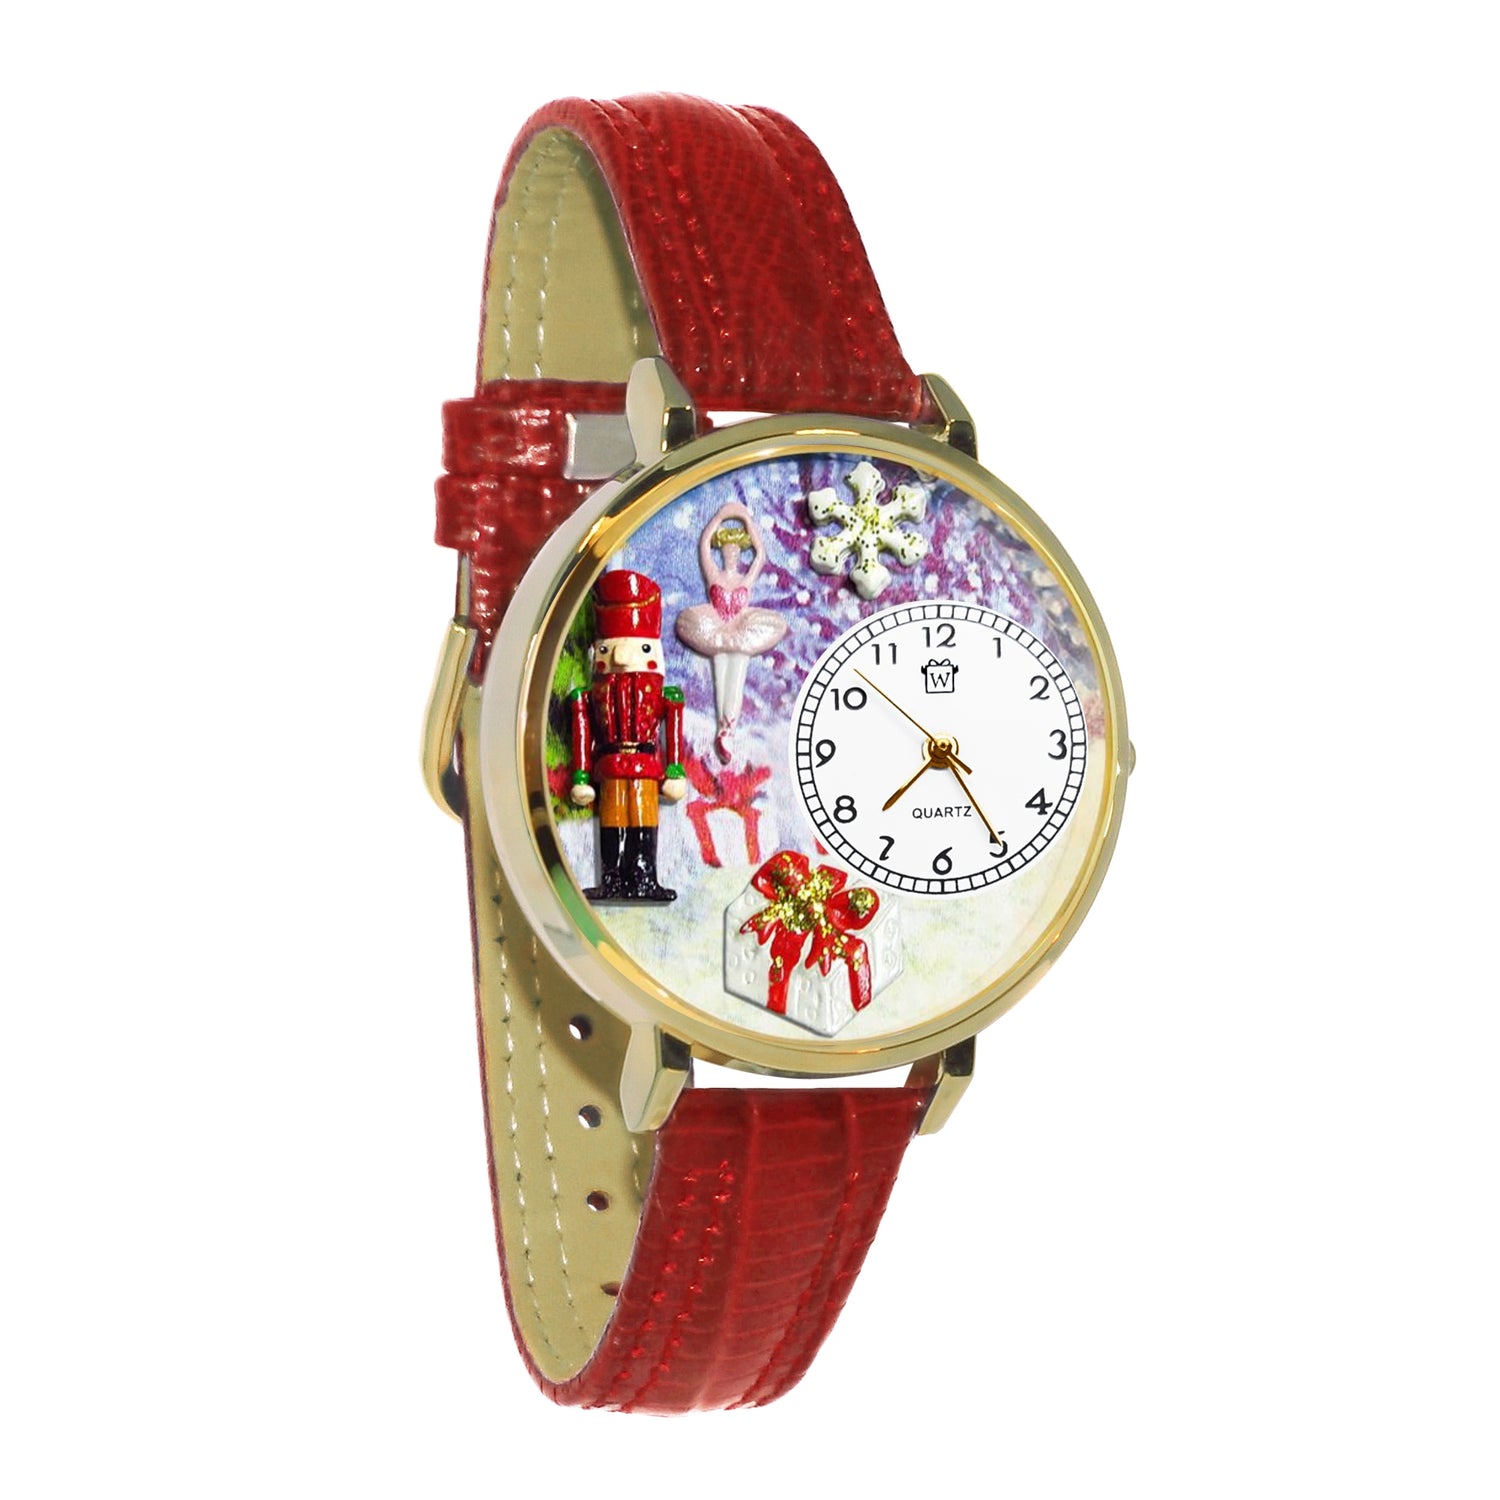 Whimsical Gifts | Nutcracker 3D Watch Large Style | Handmade in USA | Holiday & Seasonal Themed | Christmas | Novelty Unique Fun Miniatures Gift | Gold Finish Red Leather Watch Band